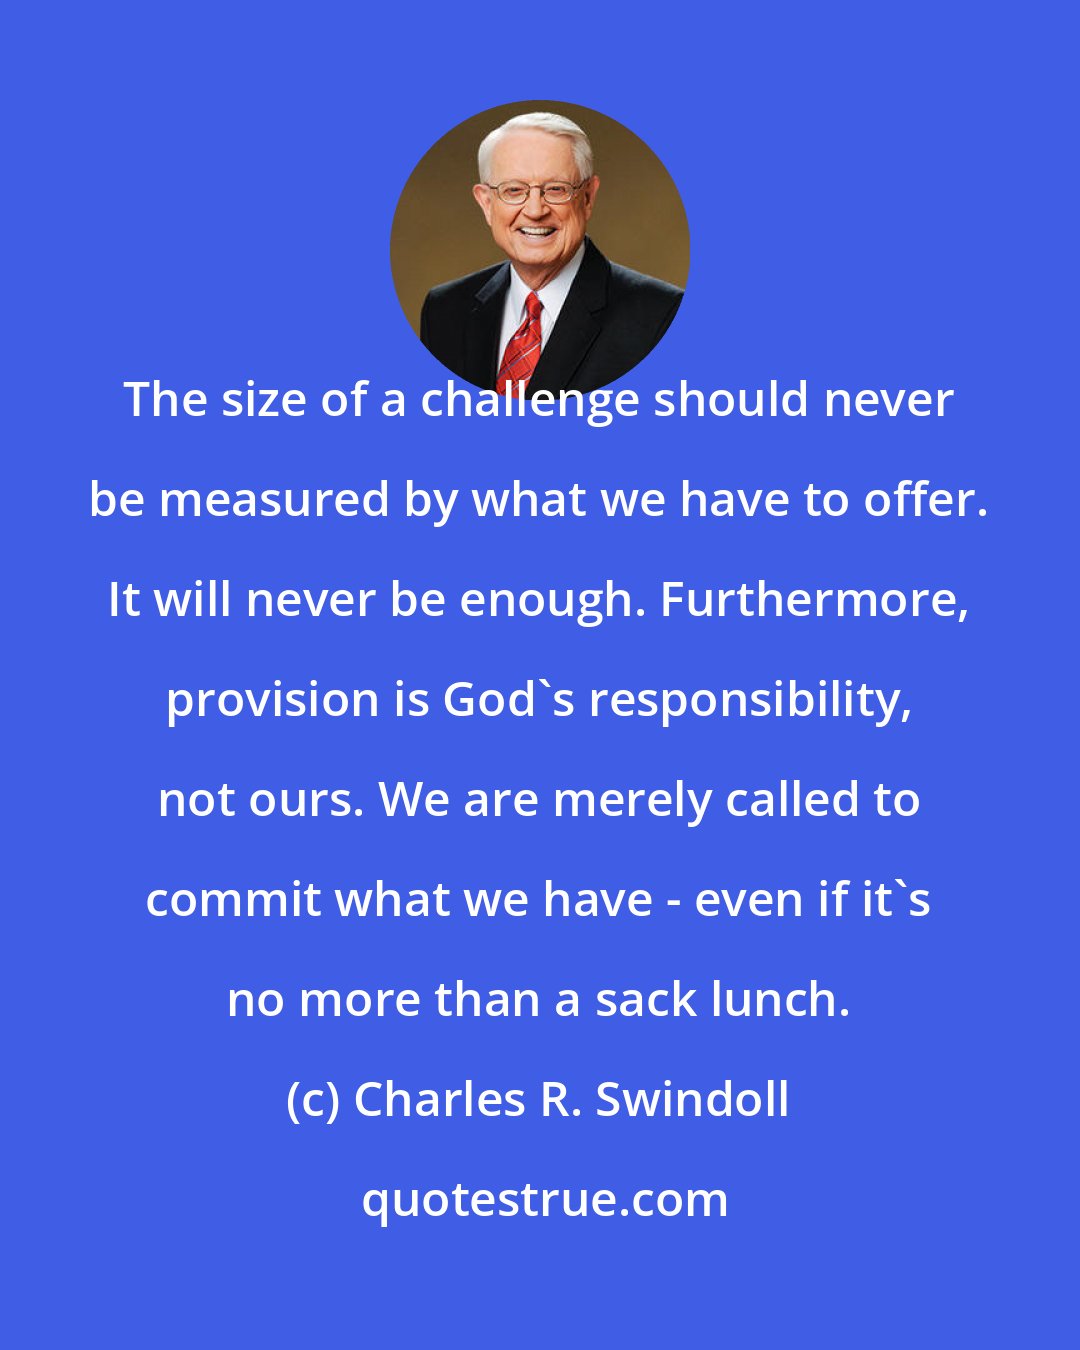 Charles R. Swindoll: The size of a challenge should never be measured by what we have to offer. It will never be enough. Furthermore, provision is God's responsibility, not ours. We are merely called to commit what we have - even if it's no more than a sack lunch.